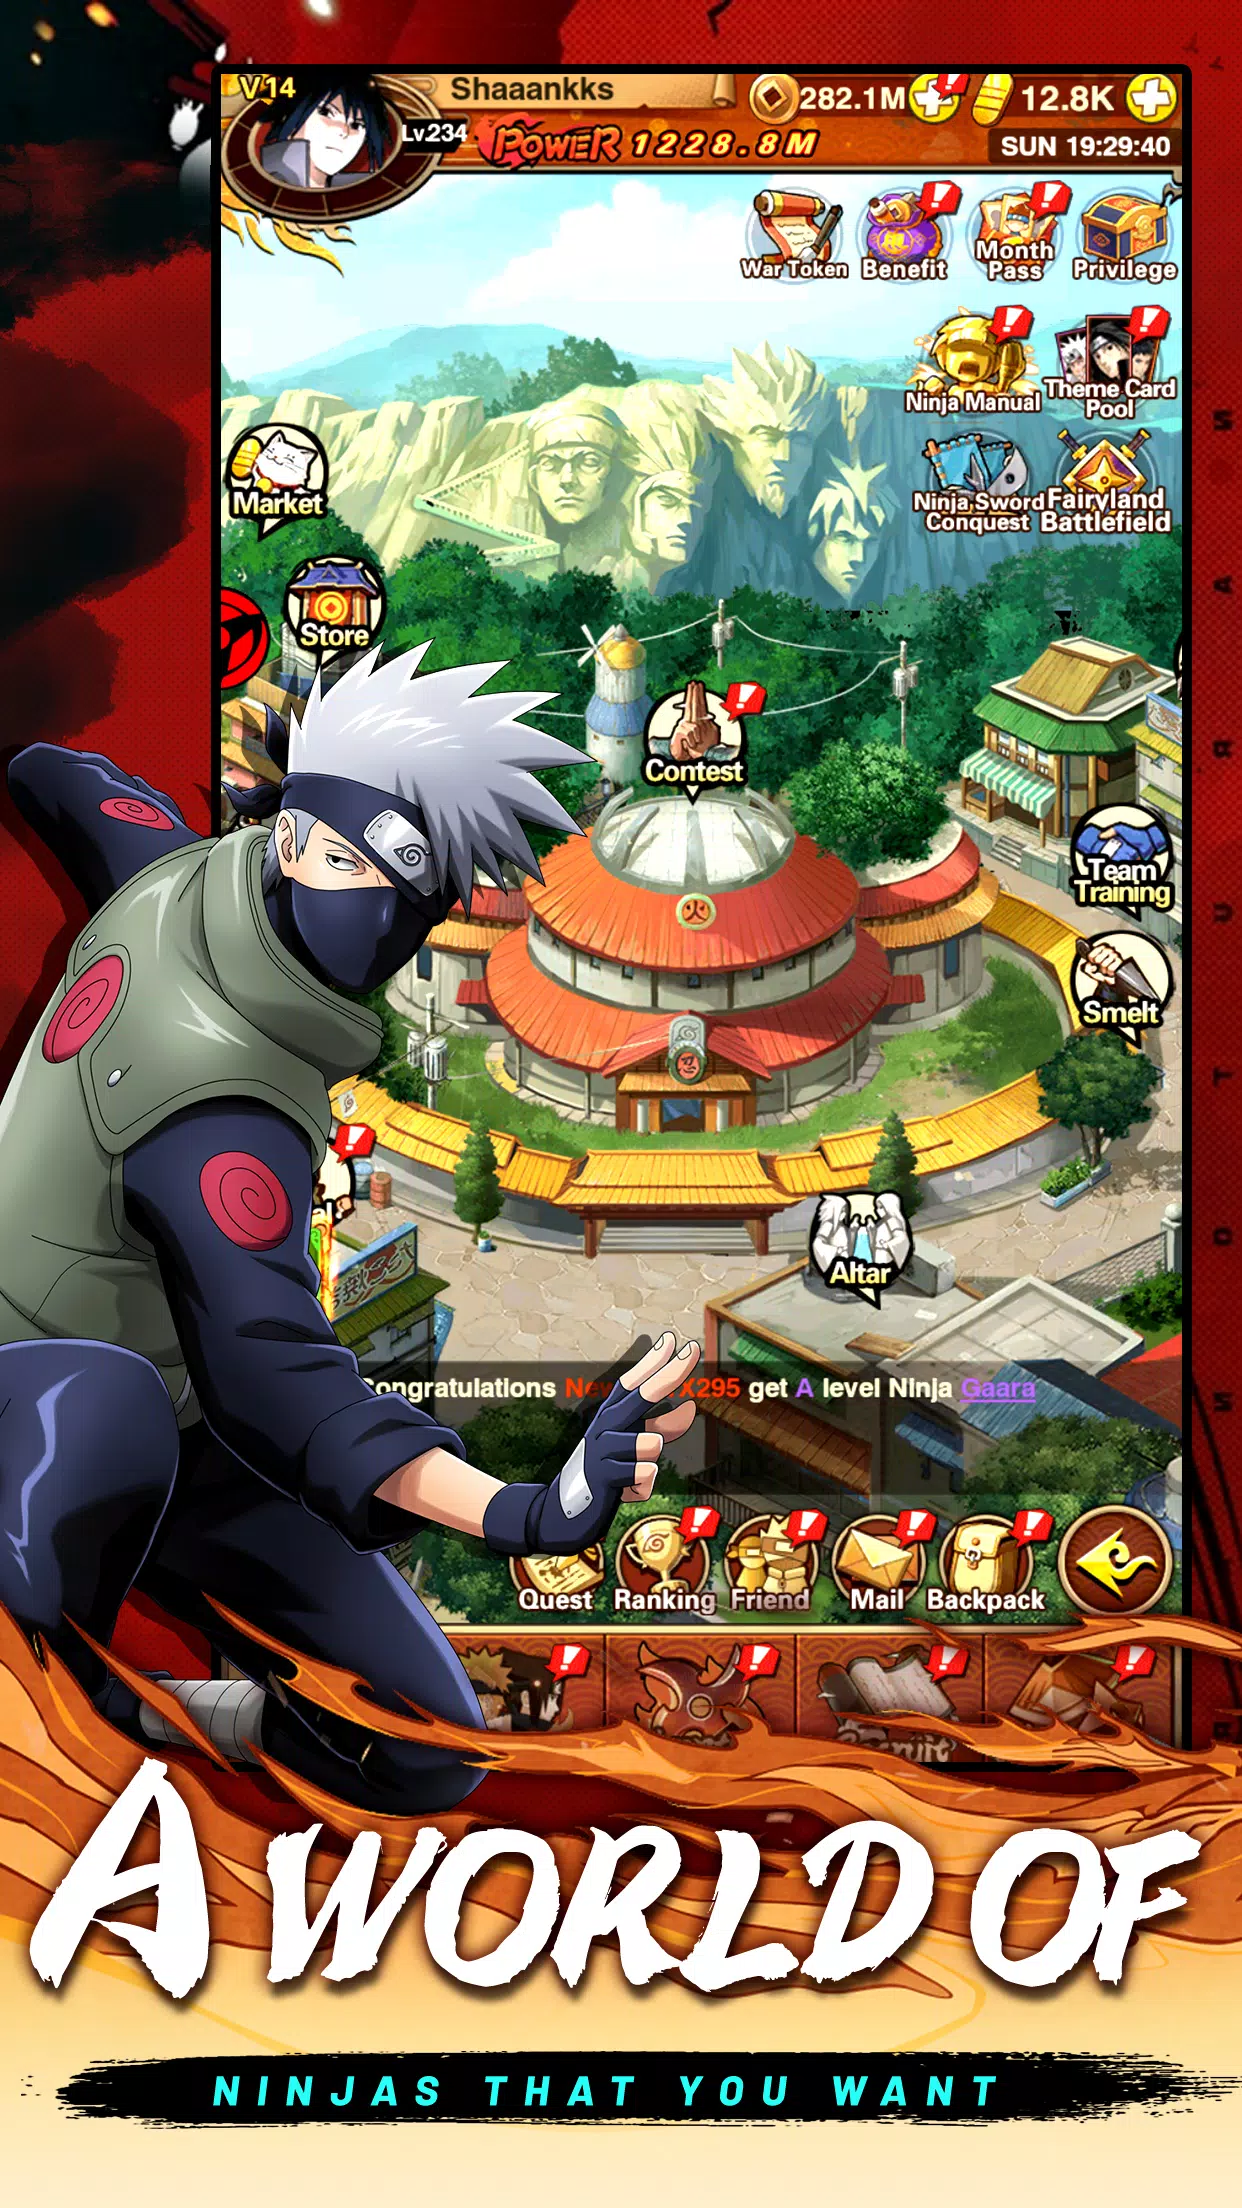 Stream Naruto Ultimate Storm Mod Apk: The Best Way to Experience